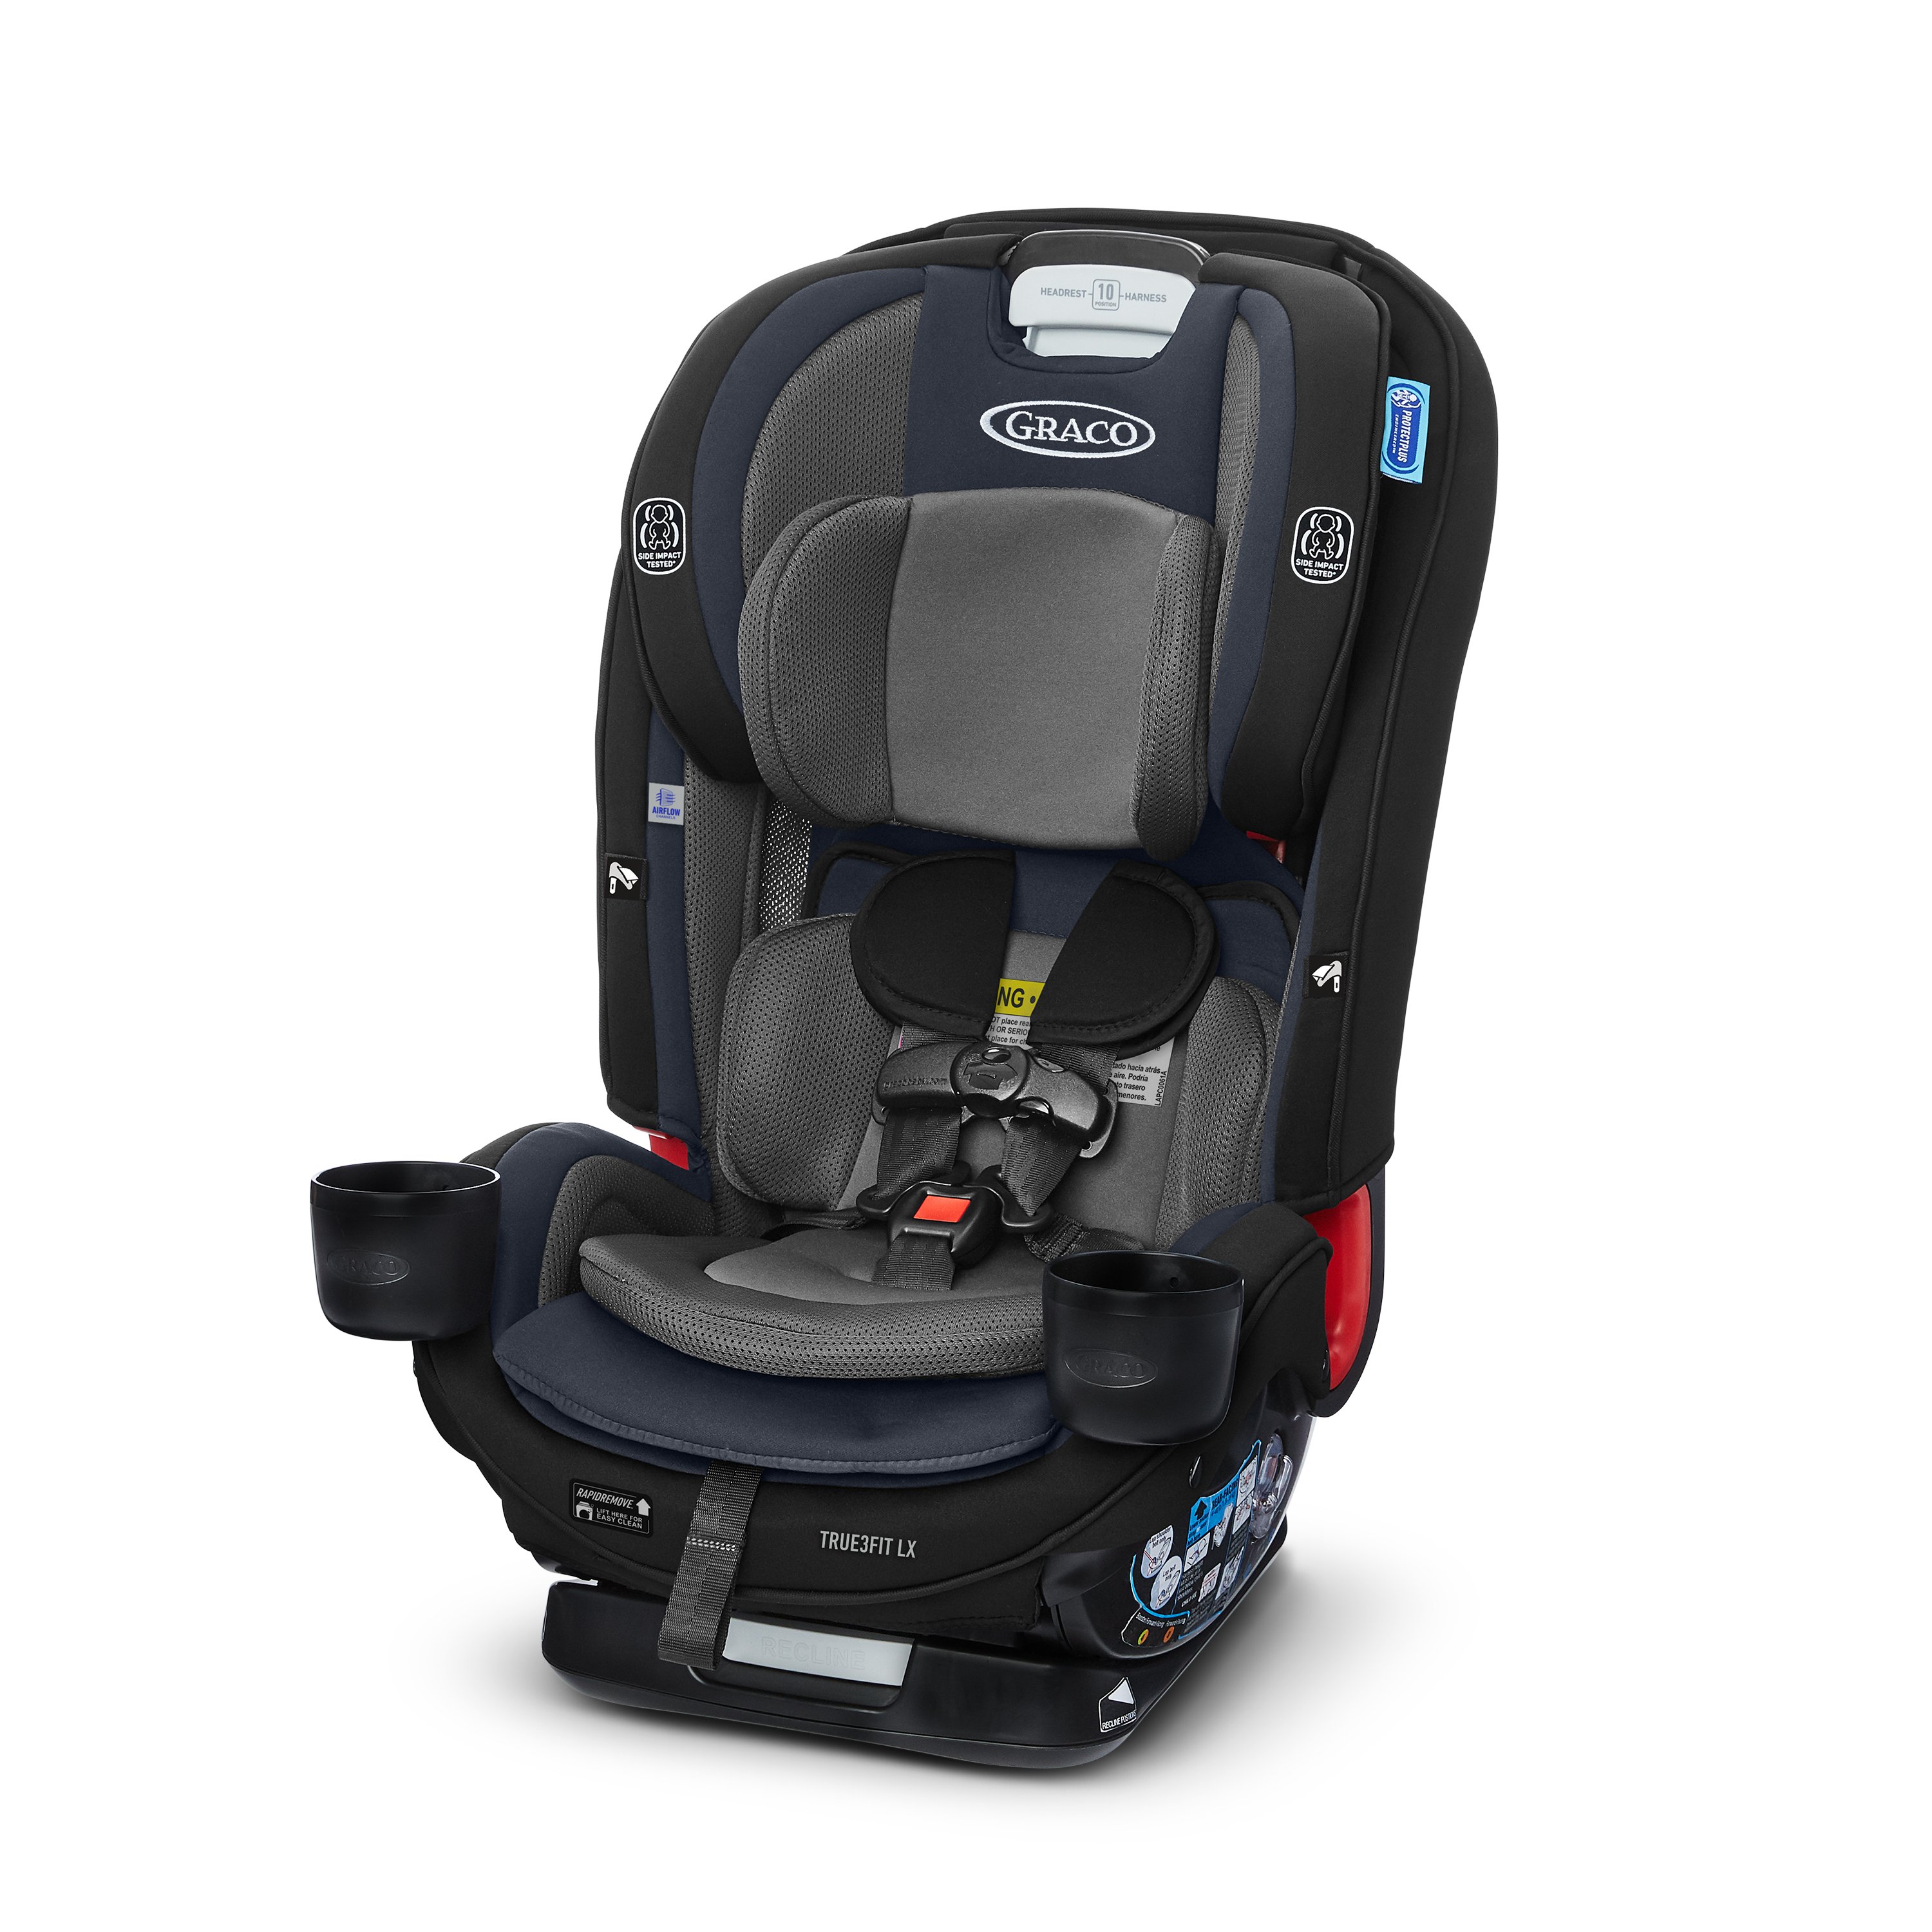 Graco True3Fit LX 3-in-1 Car Seat, Fits 3 Car Seats Across, Bates - image 1 of 16